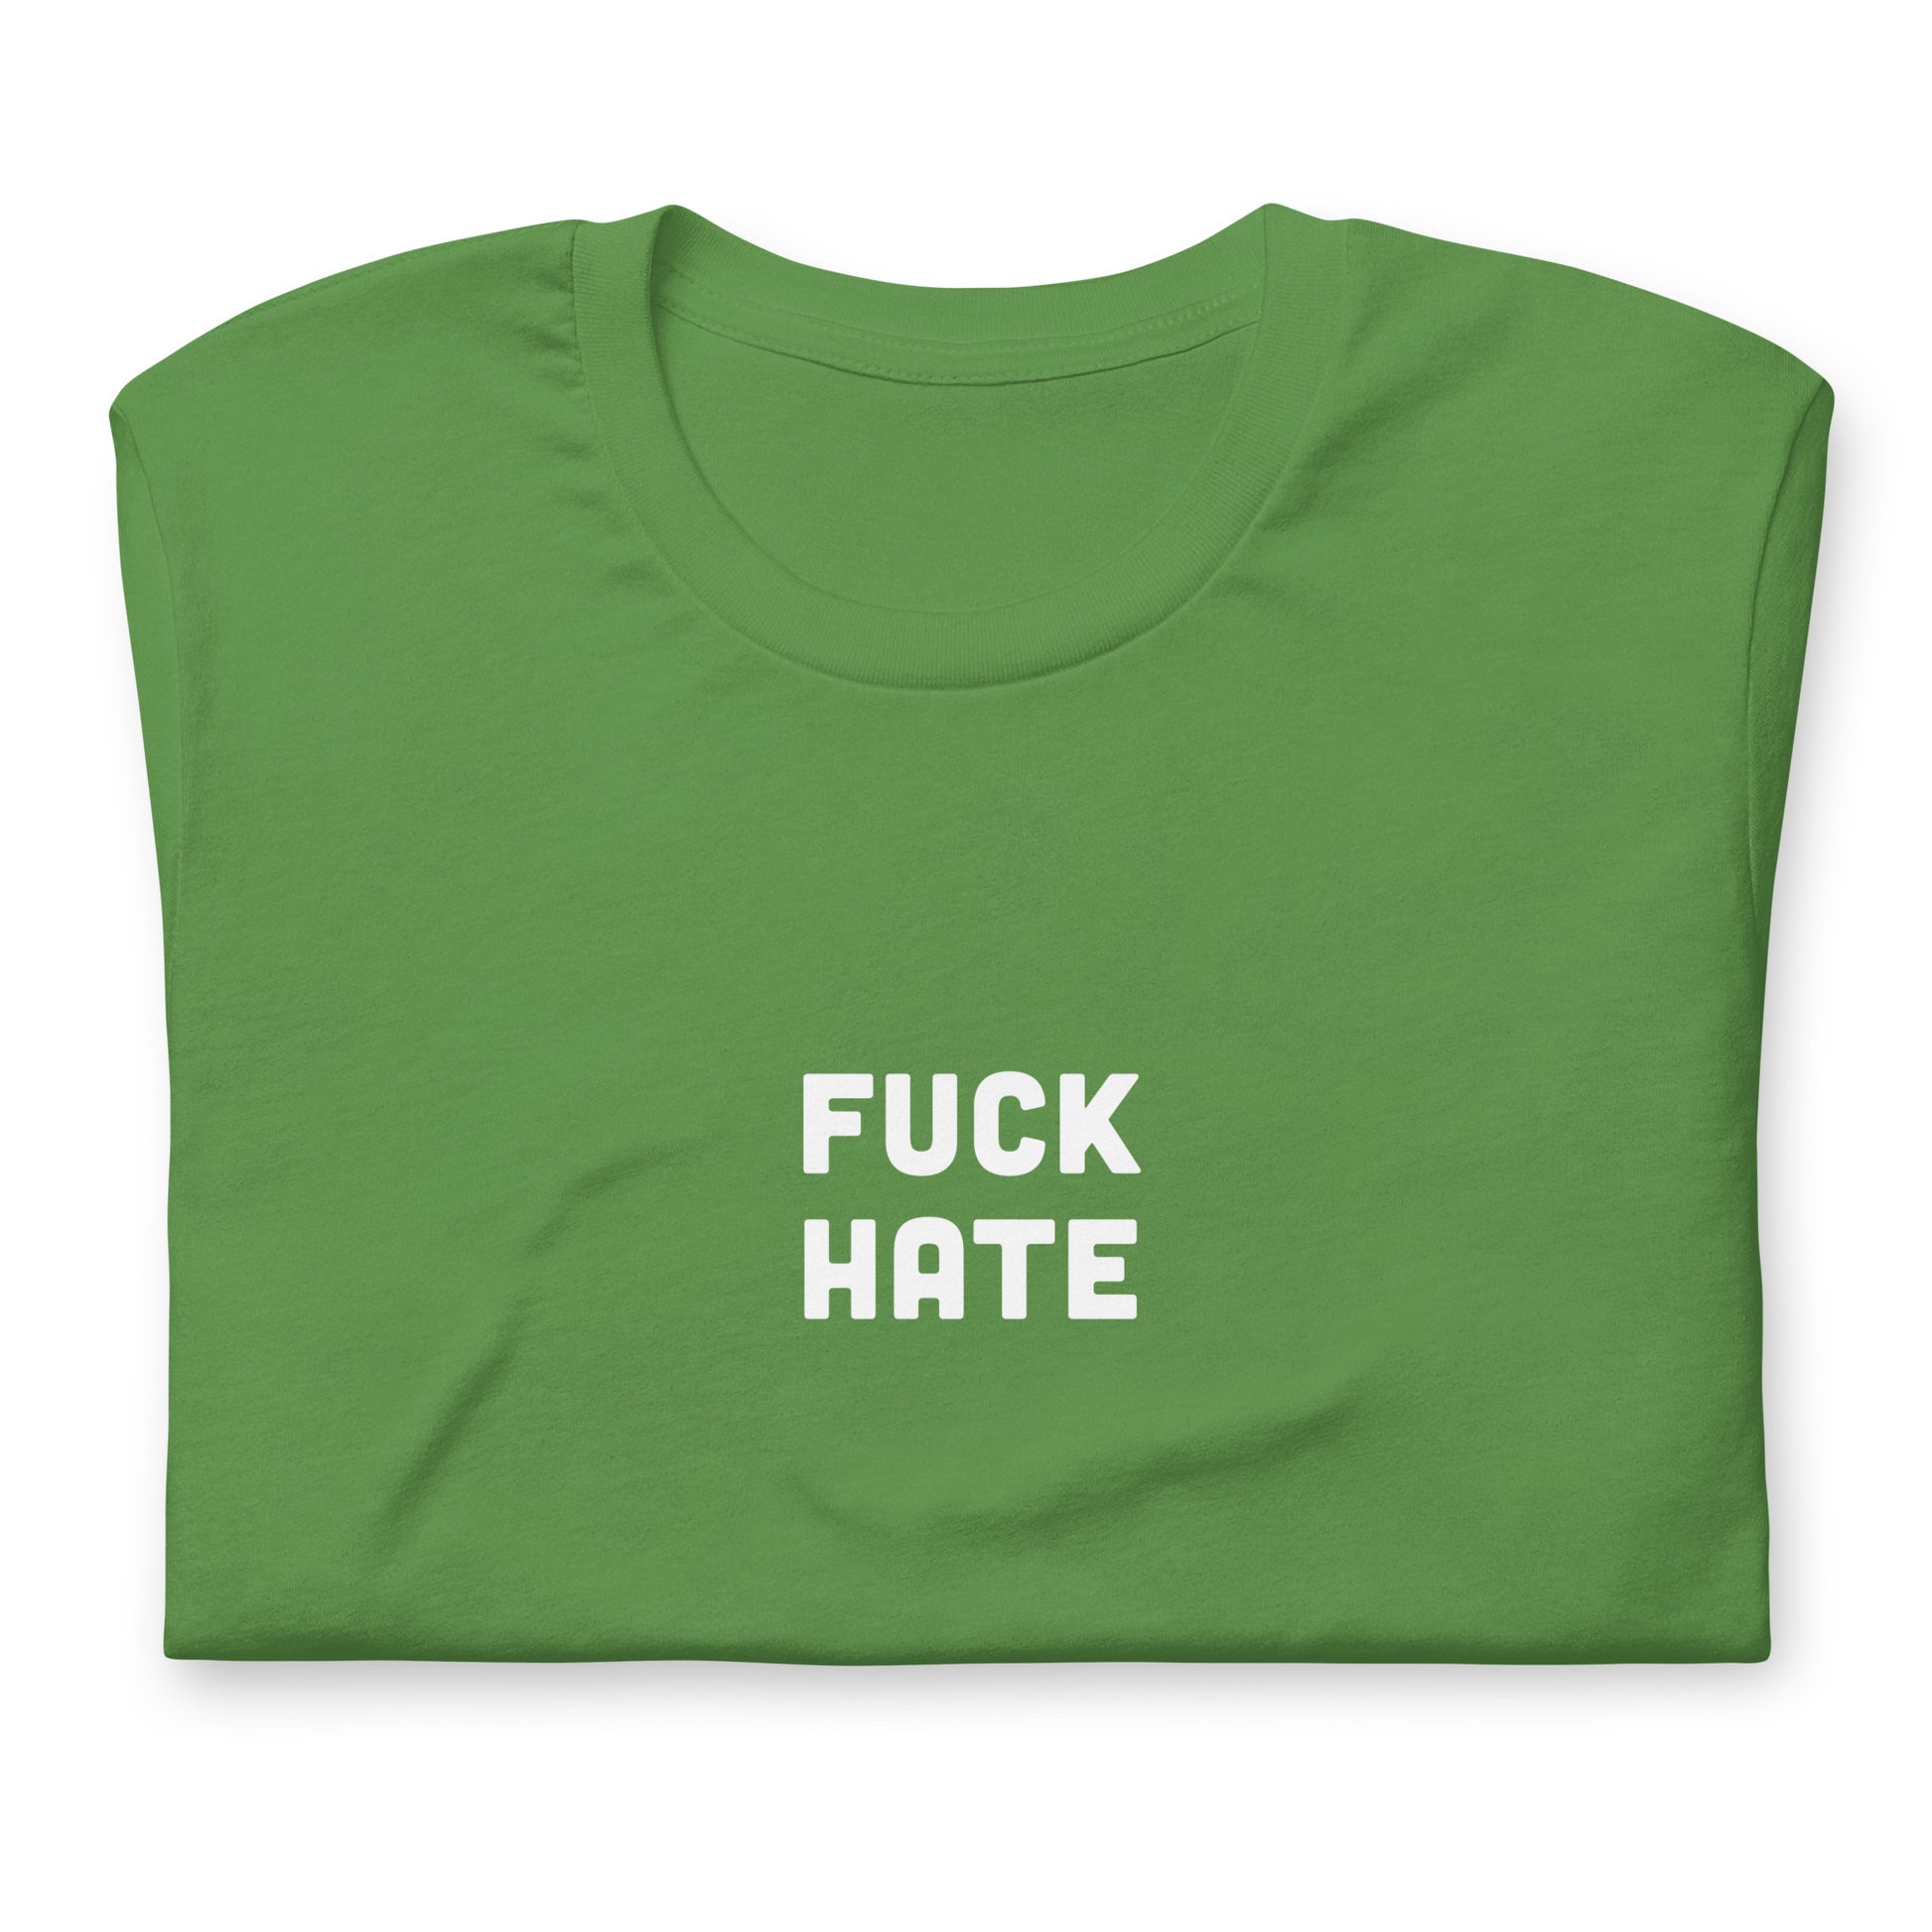 Fuck Hate T-Shirt Size 2XL Color Navy